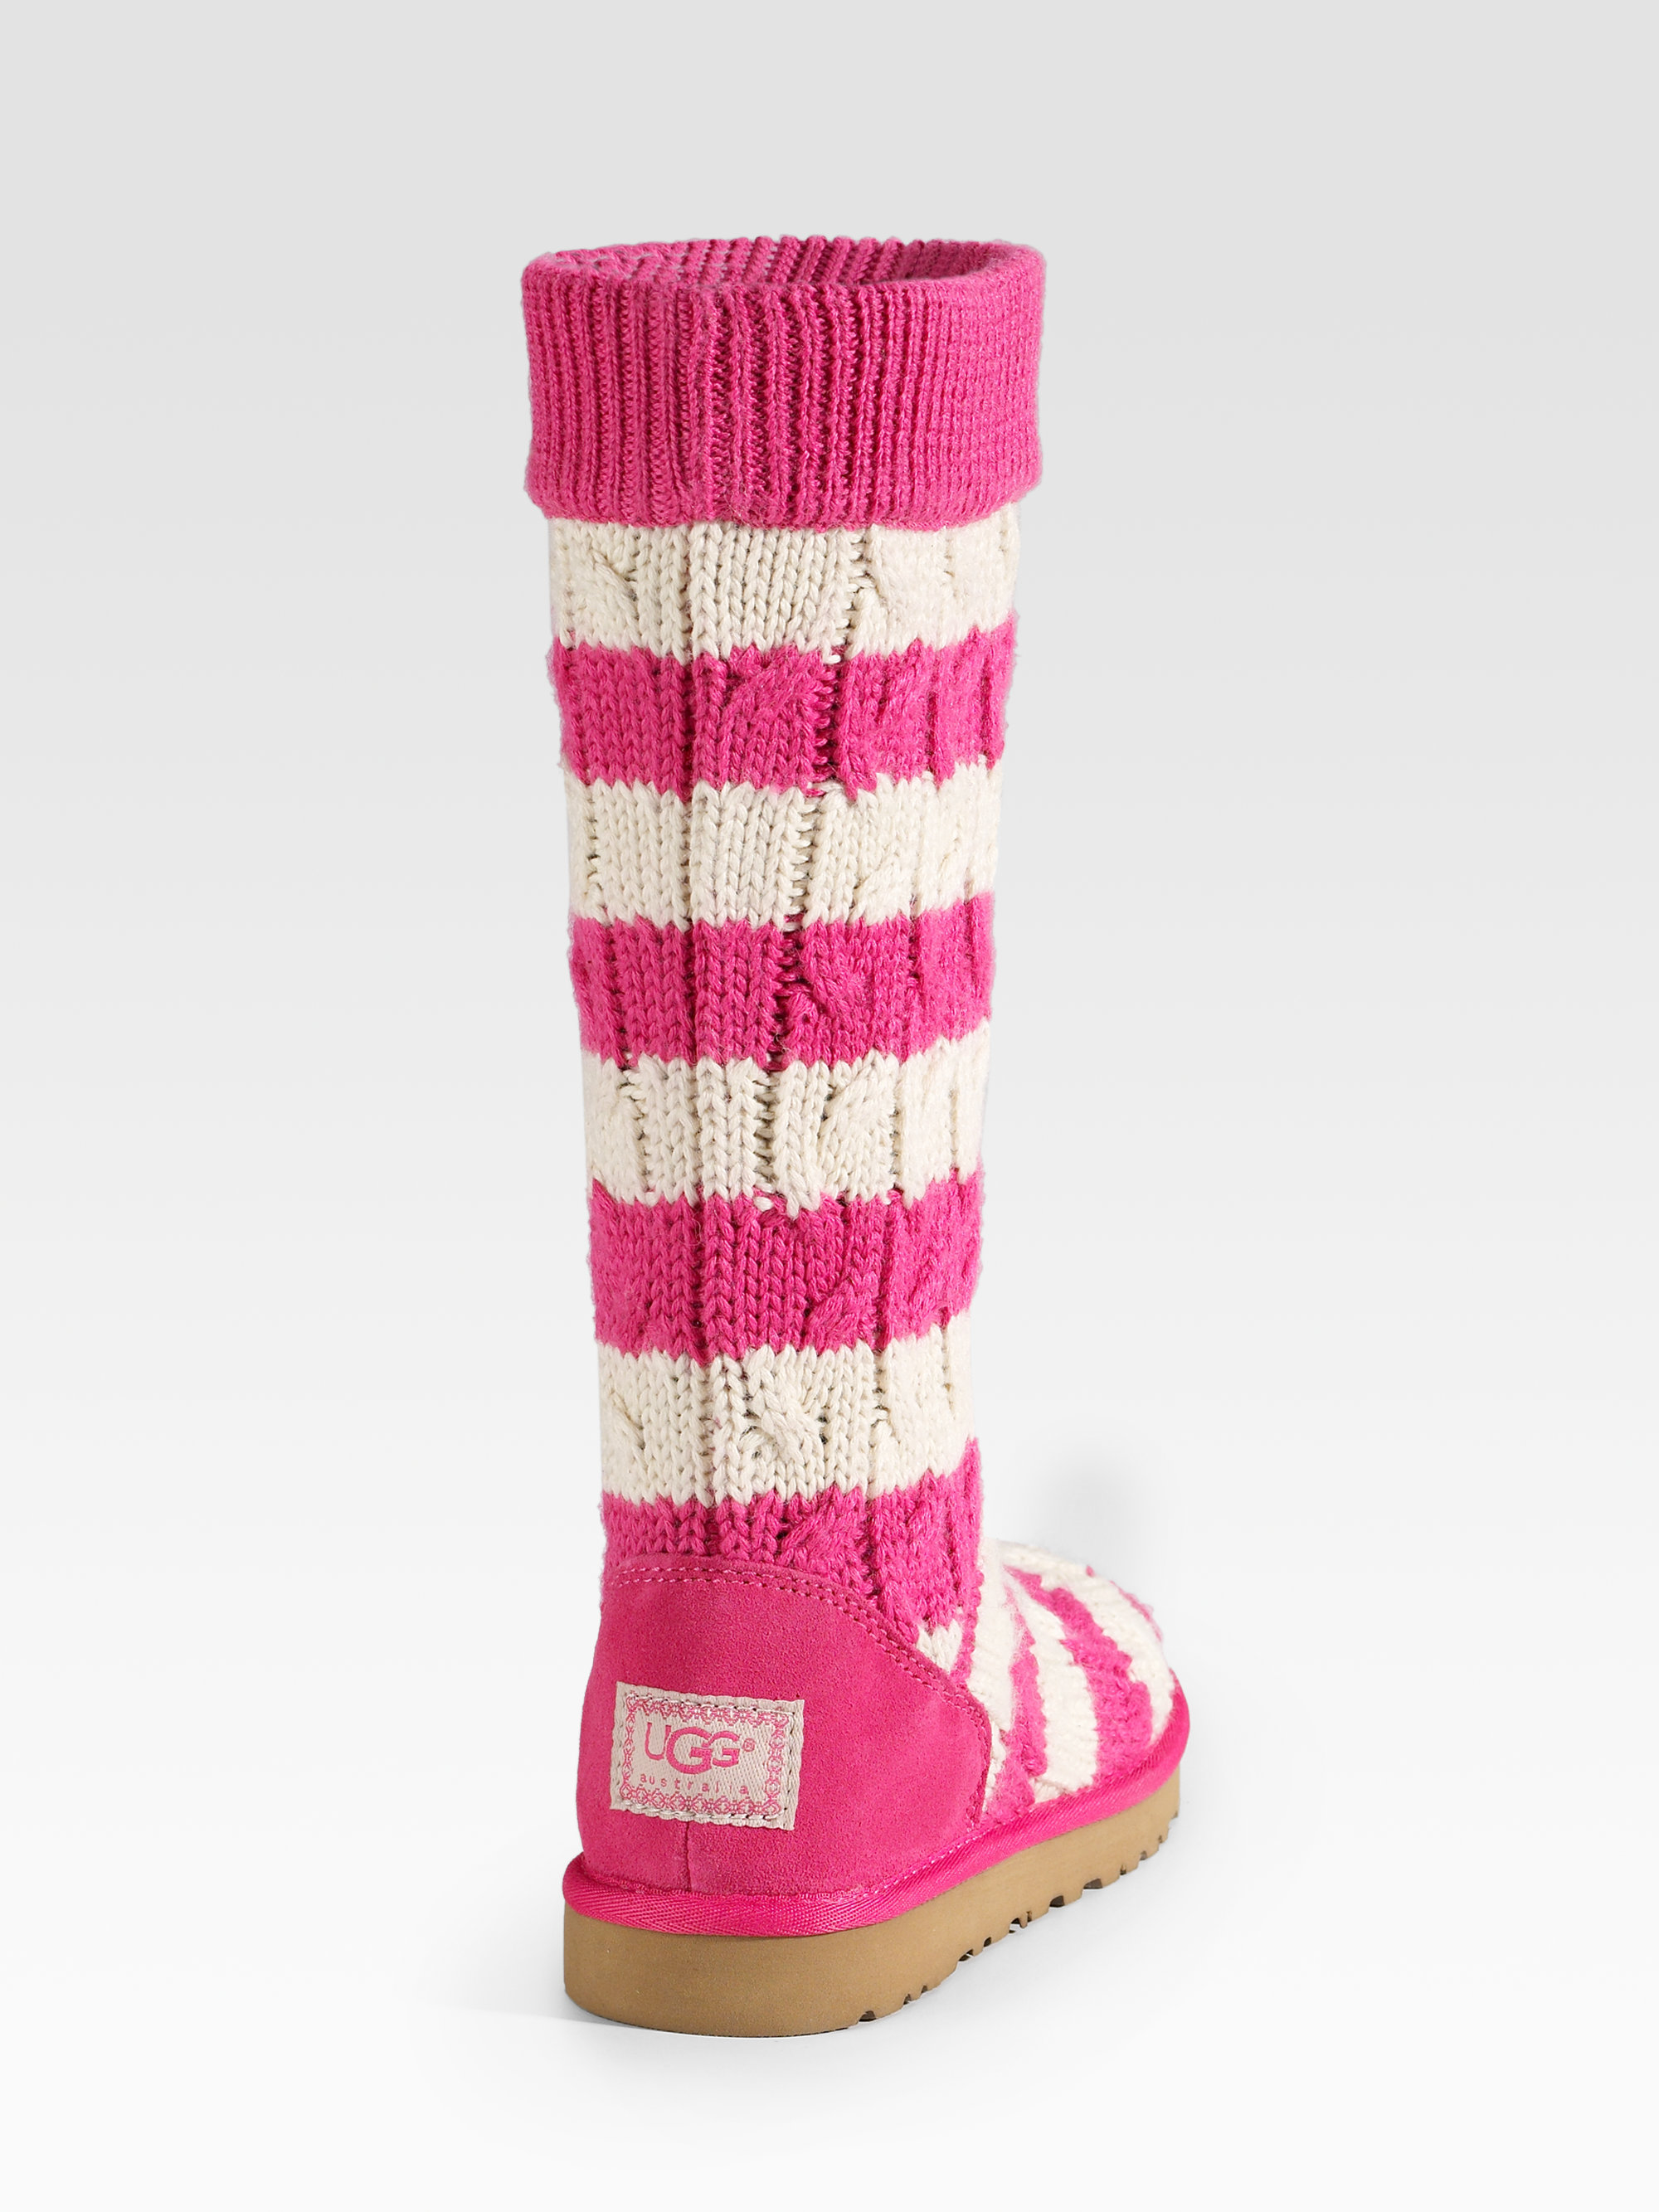 cable knit uggs